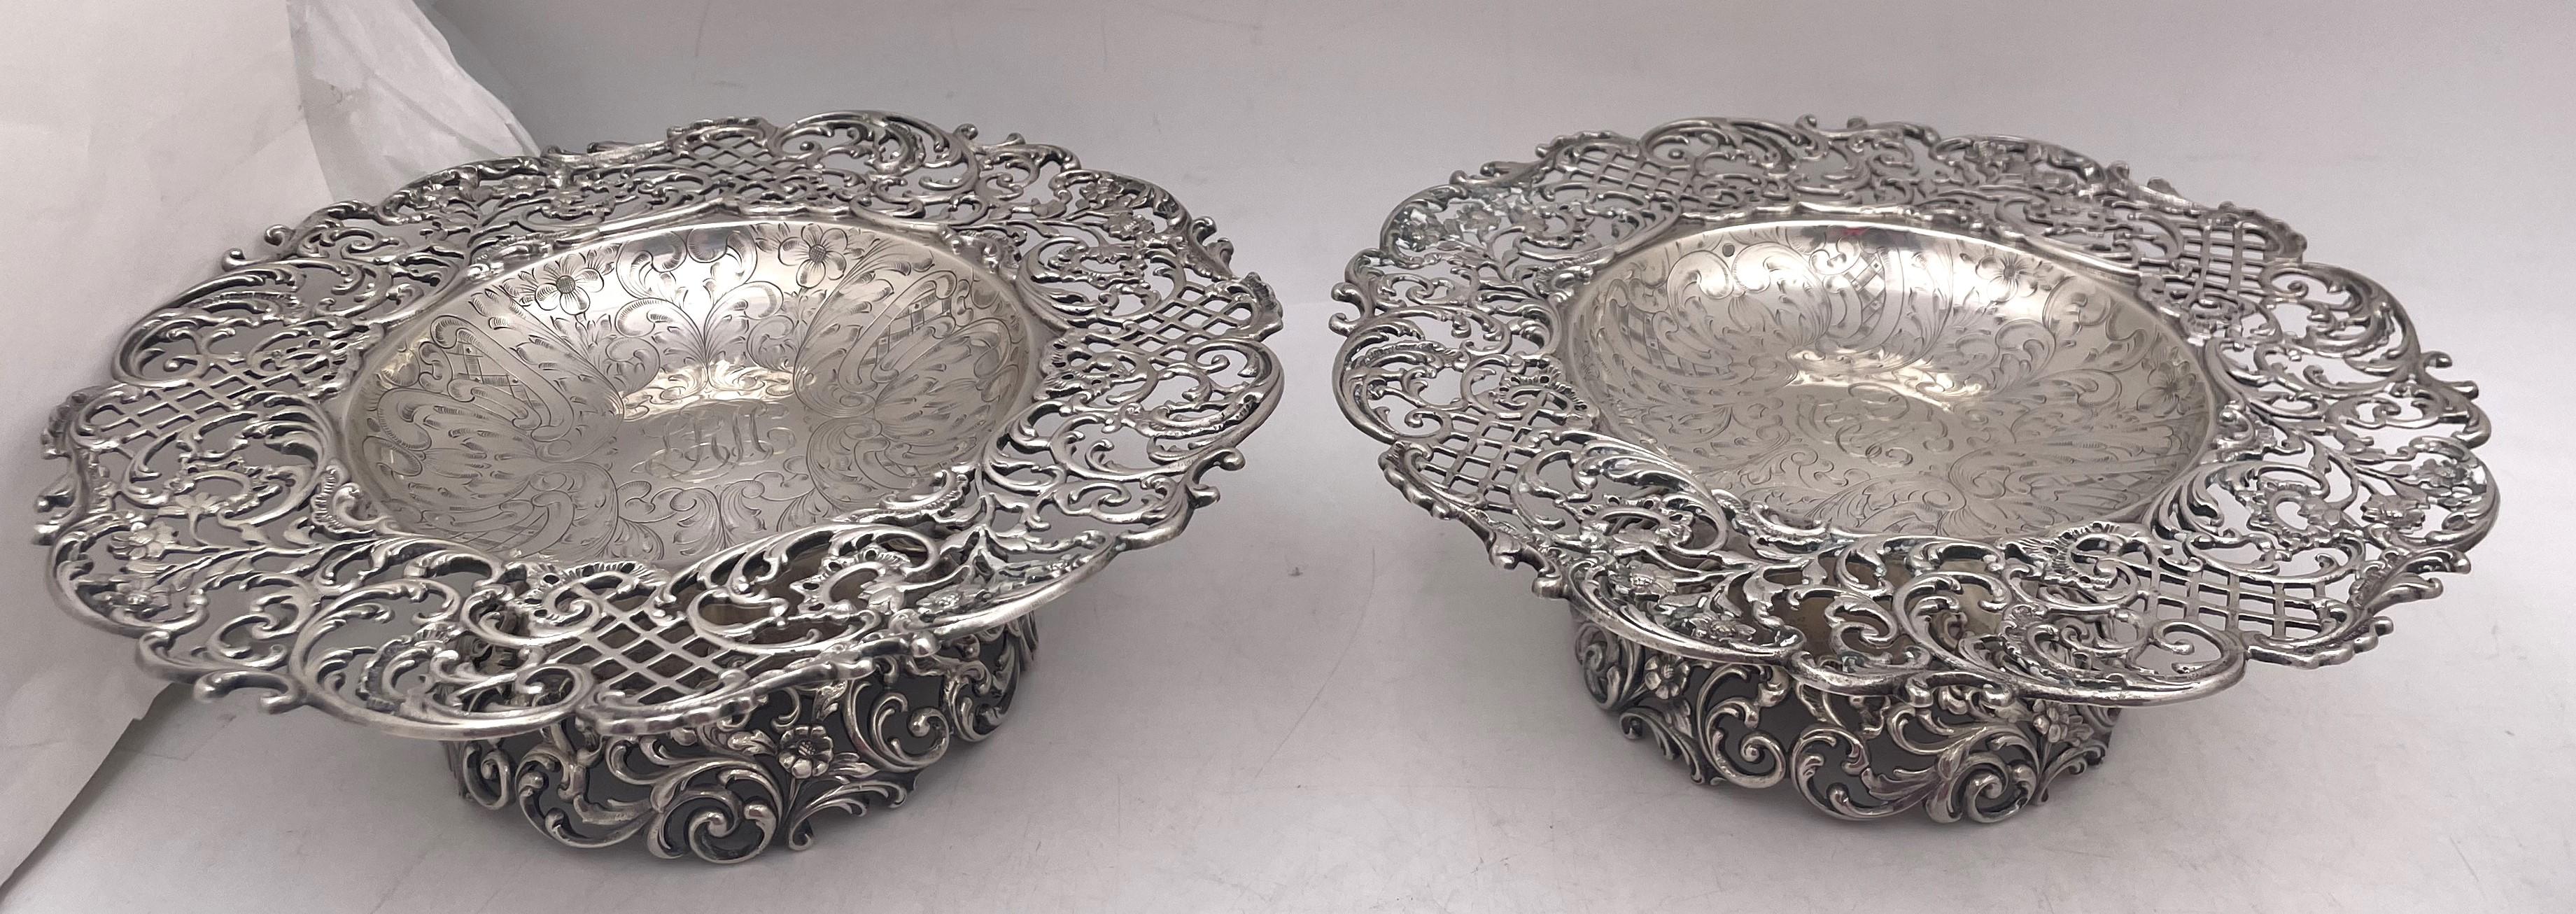 Roger Williams pair of sterling silver compote, tazze or footed bowls, from the early 20th century, in Art Nouveau style, with pierced openwork showcasing floral and curvilinear palmette motifs, beautifully engraved at the center. They measure 9